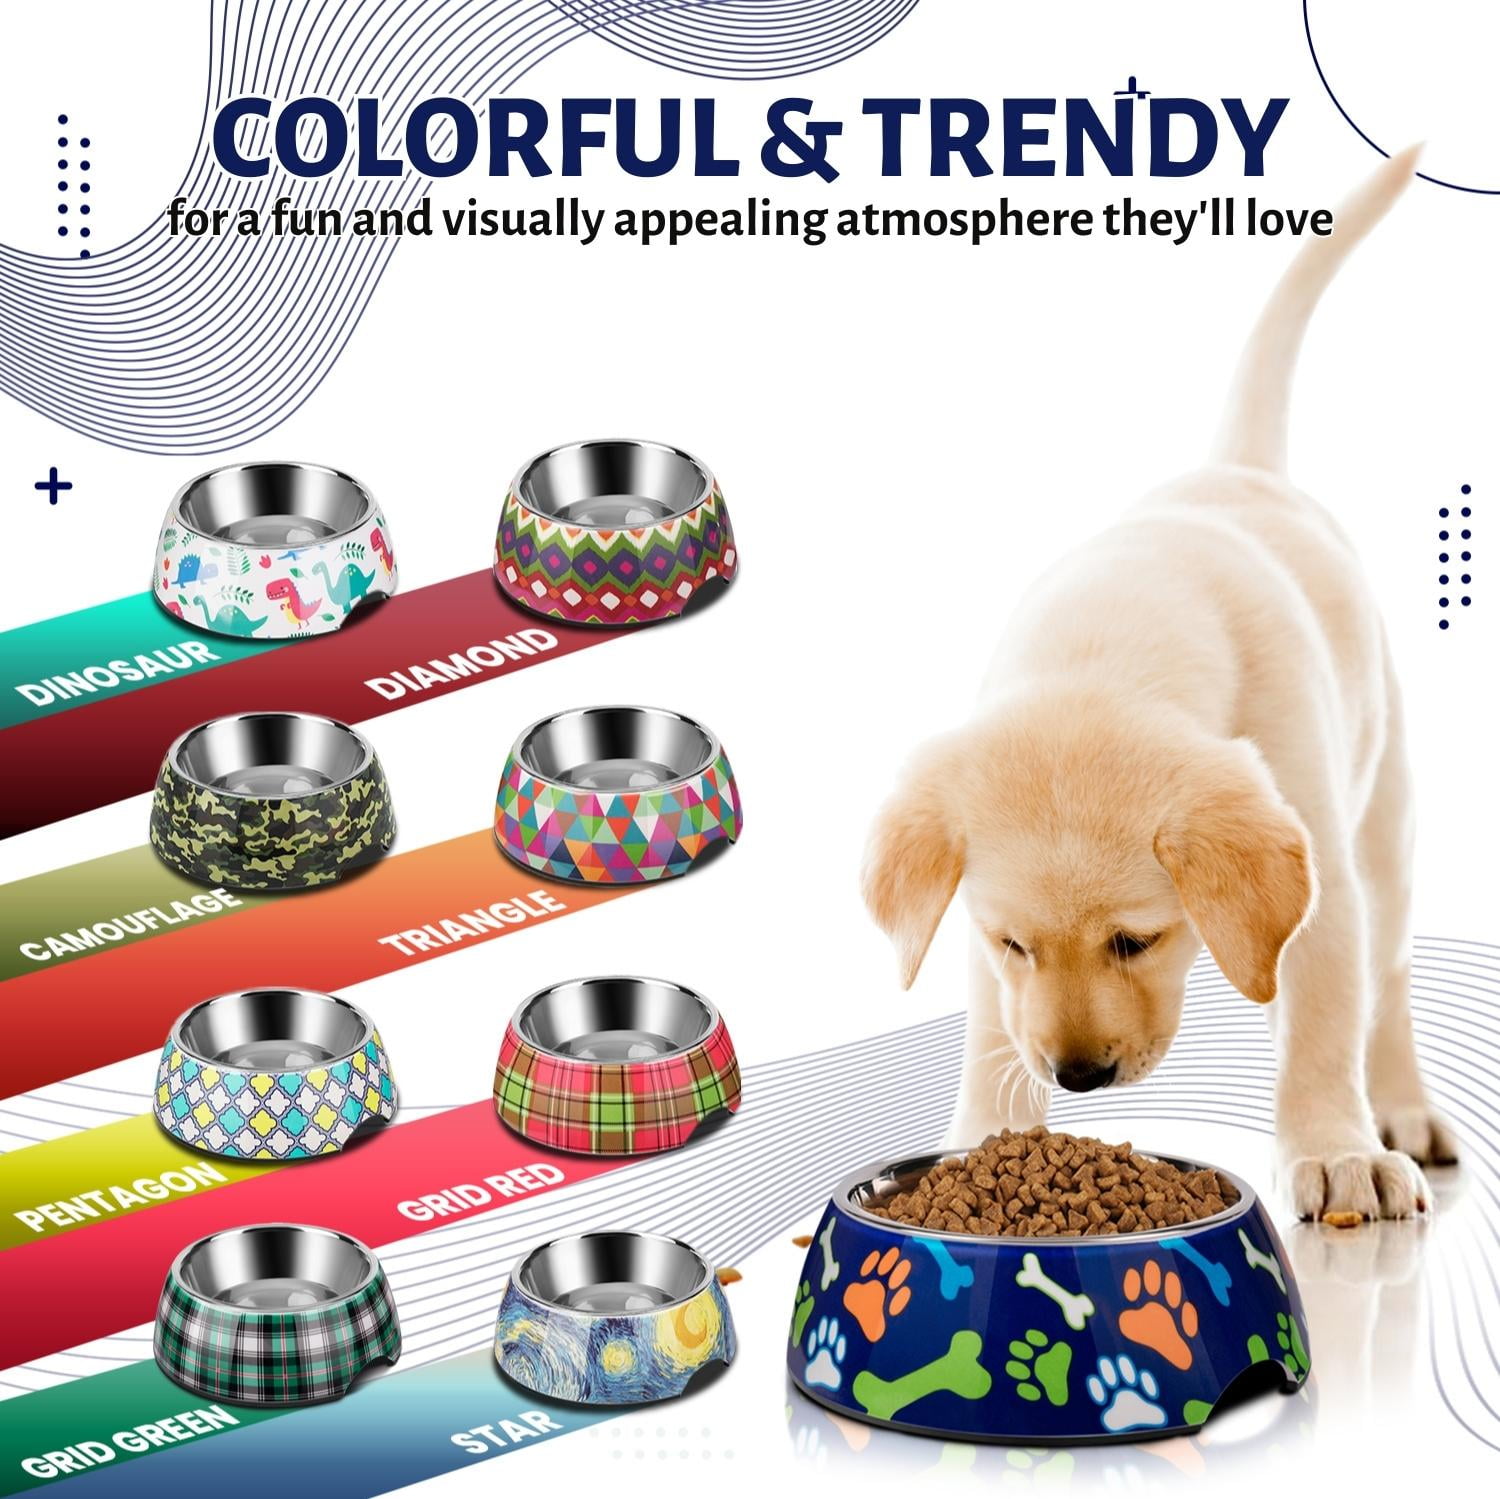 Stainless Steel Non-Slip Rubber Bottom Puppy Dog Bowl Easy to Clean Multi-Dog  Feeding Bowl in Sliver H-D0102HI2MMW - The Home Depot